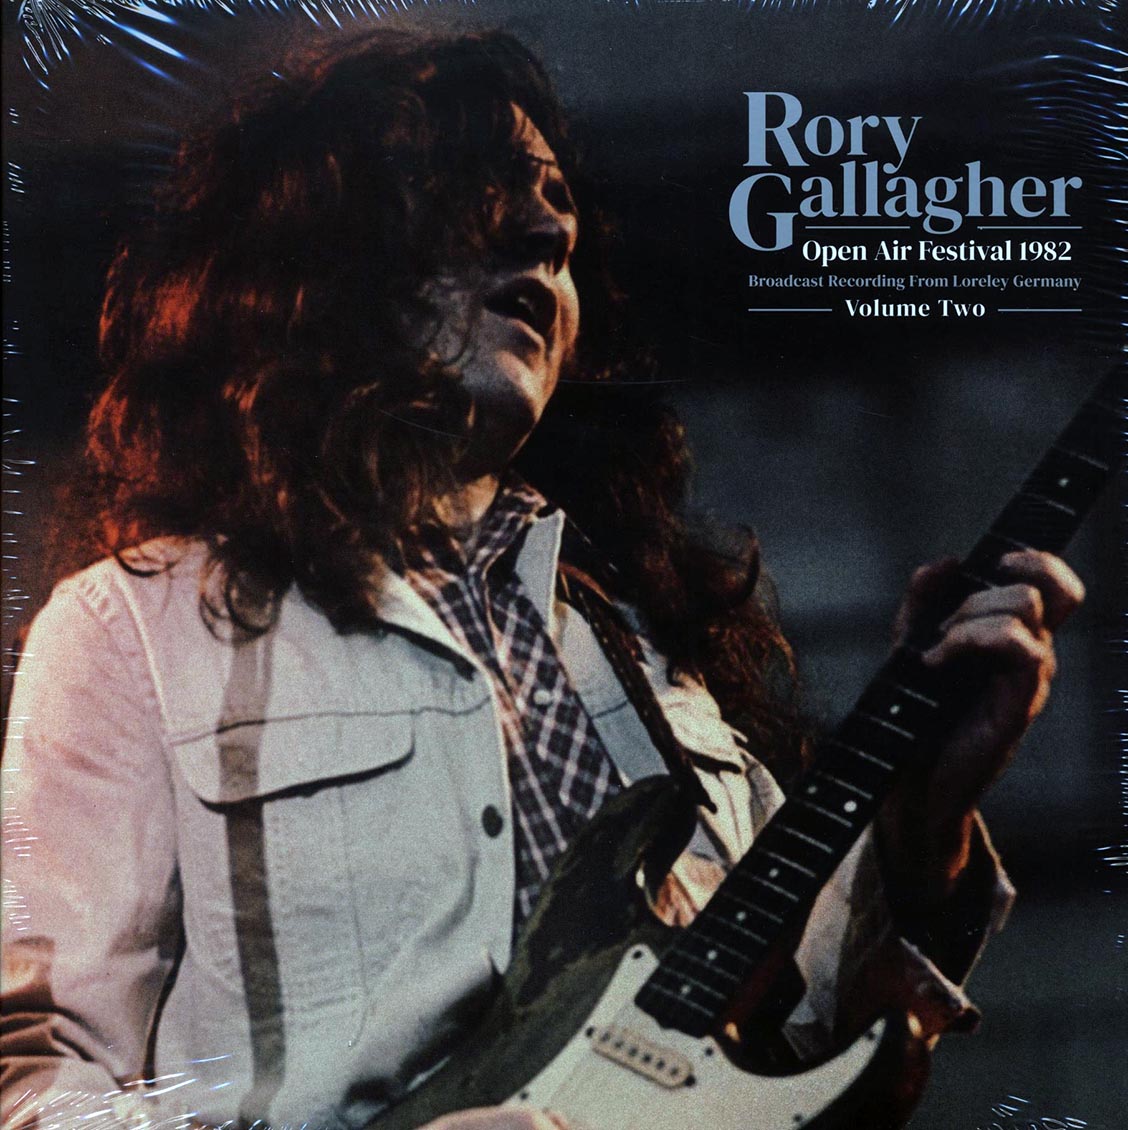 Rory Gallagher - Open Air Festival 1982 Volume 2: Broadcast Recording From Loreley Germany - Vinyl LP